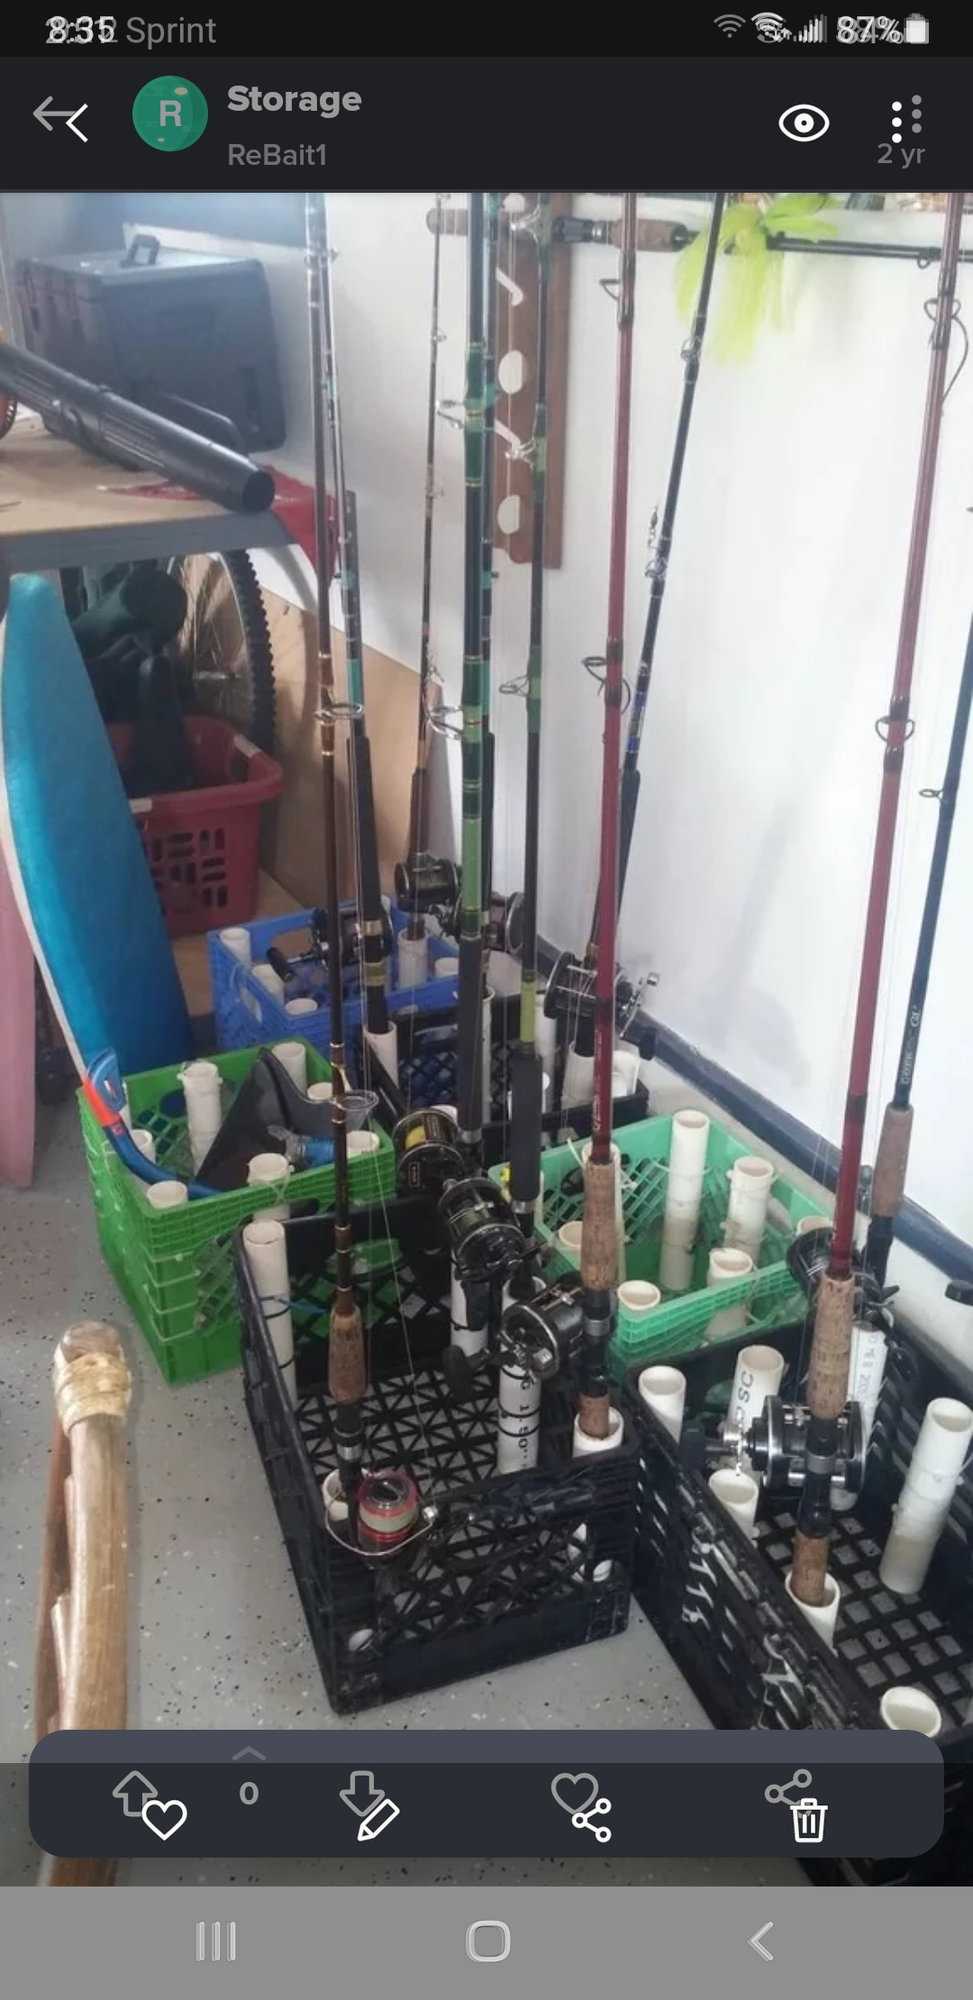 PVC Rod Storage - The Hull Truth - Boating and Fishing Forum